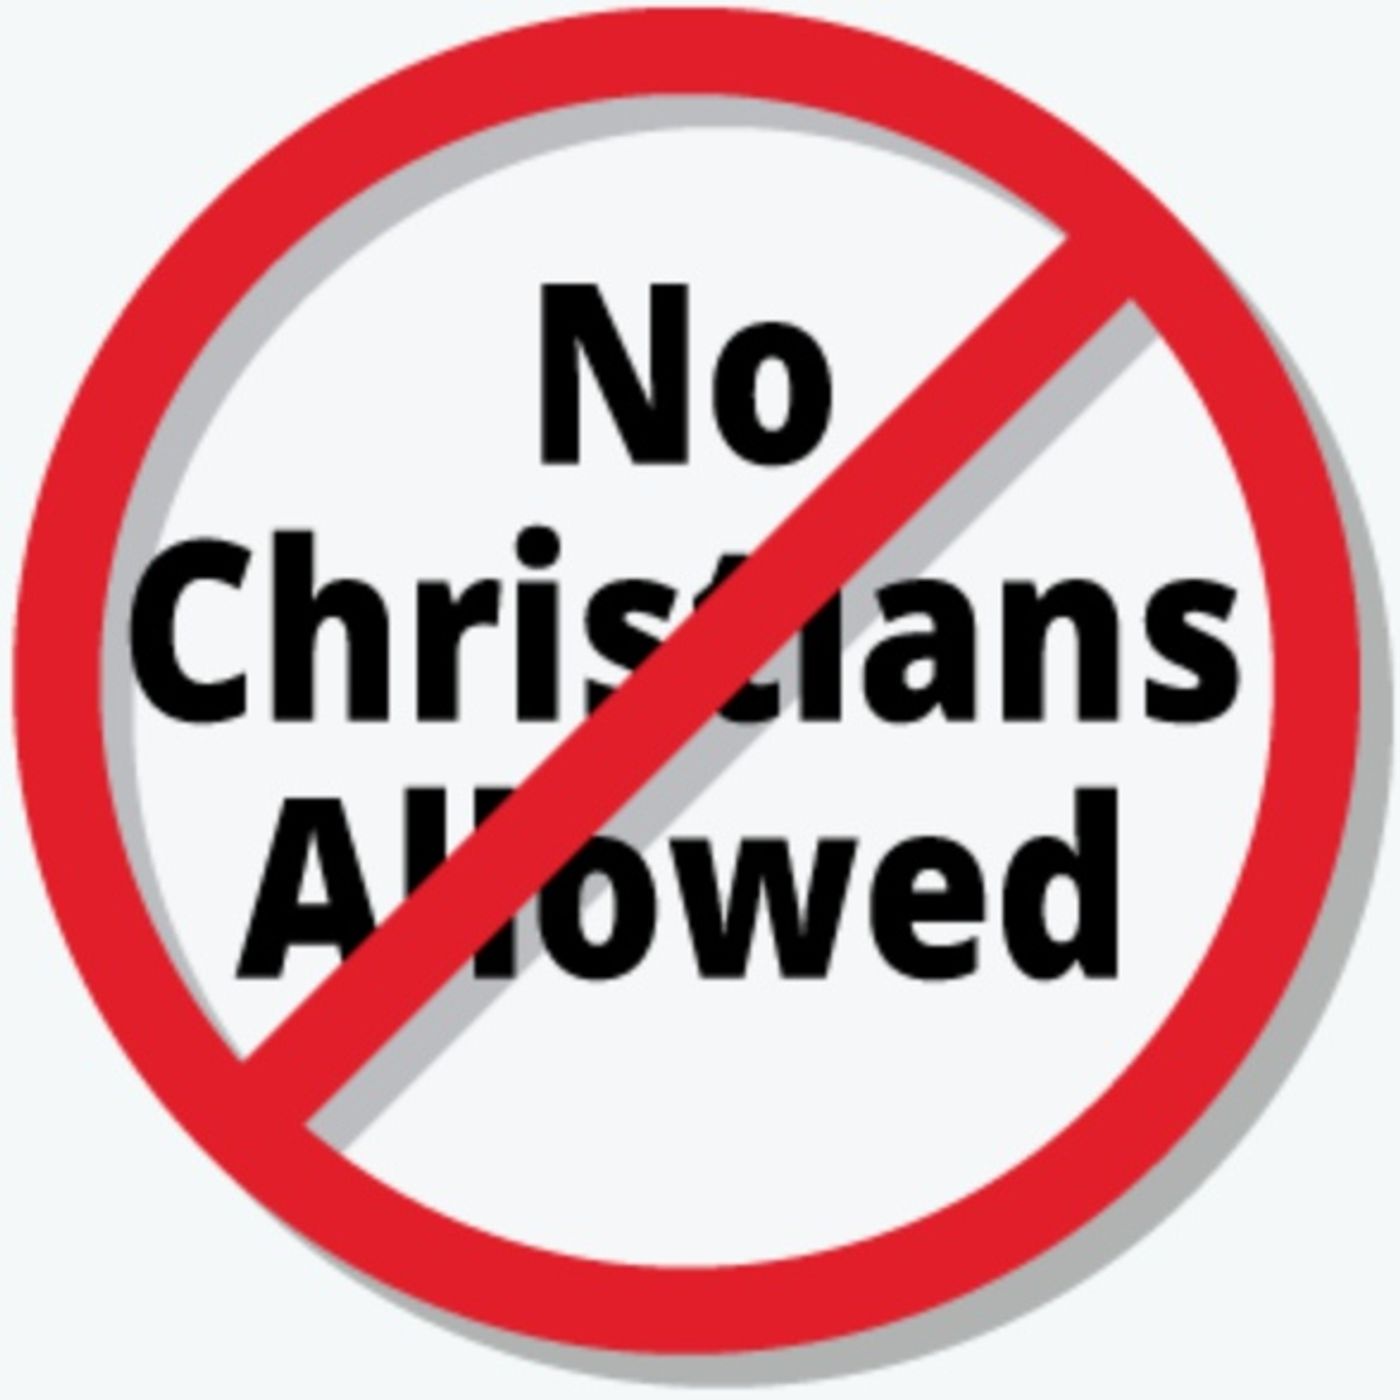 Episode 6: I'm not a Christian